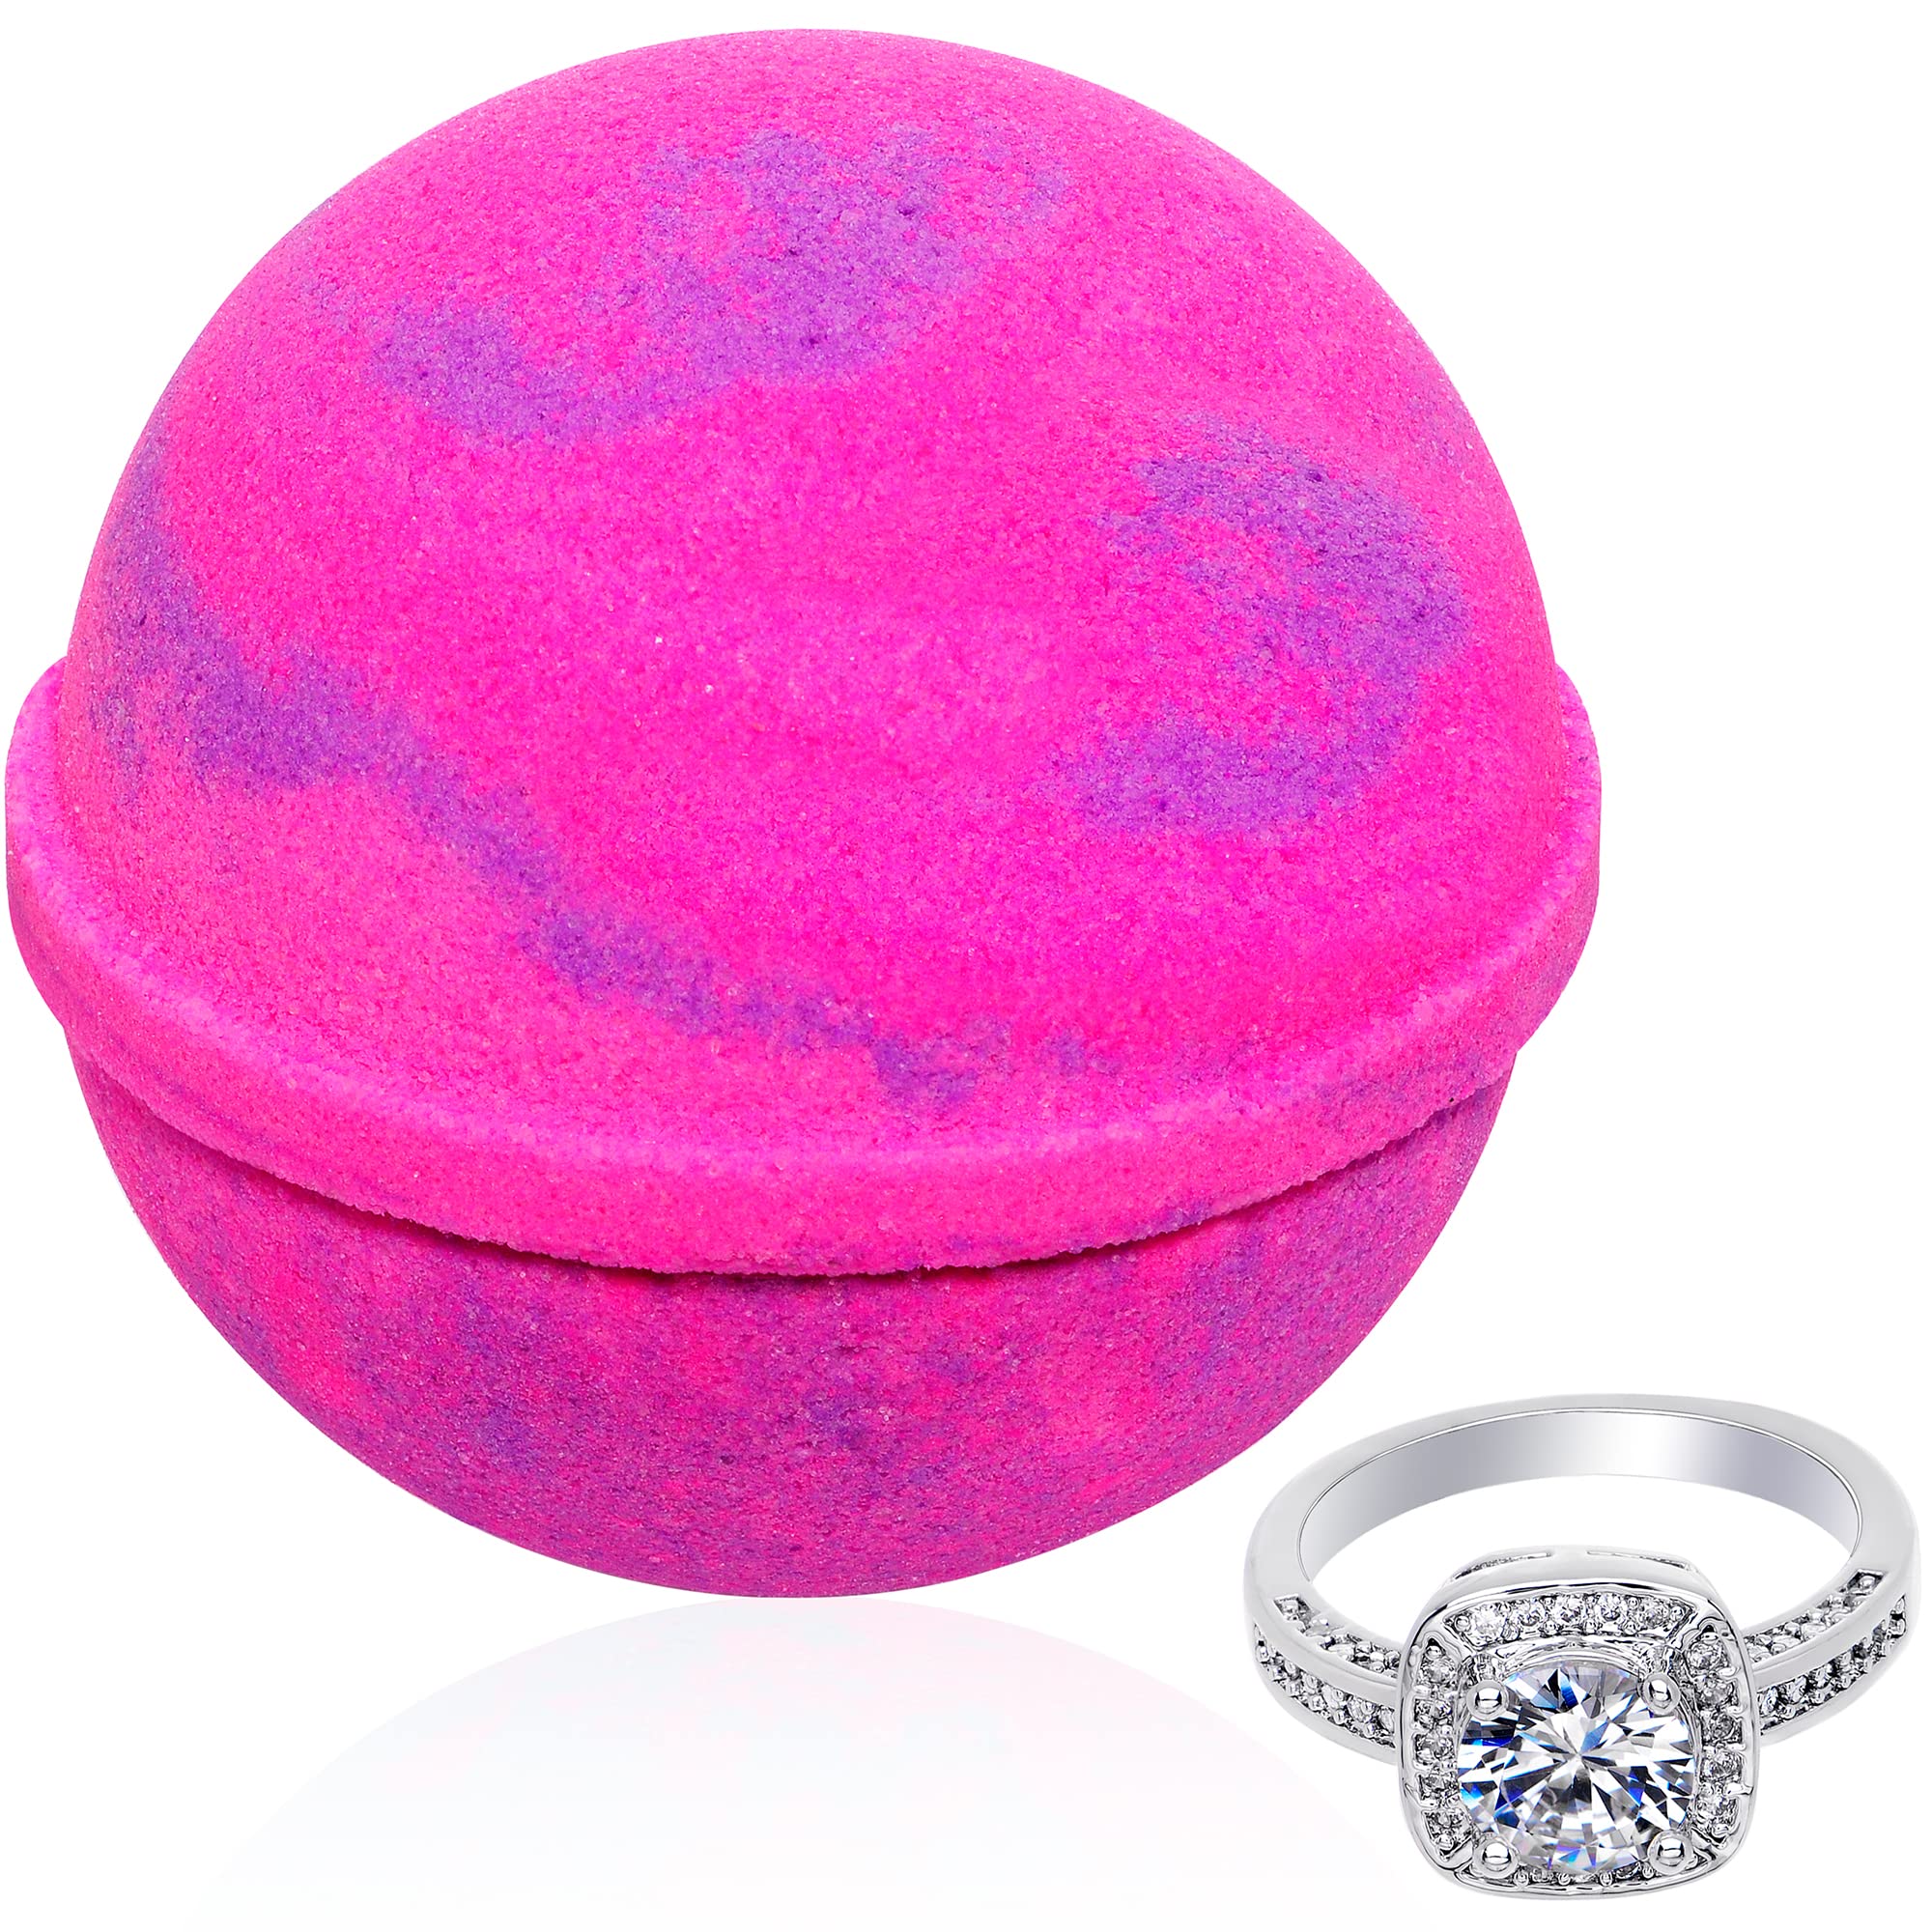 Bath Bomb with Size 8 Ring Inside Love Potion Extra Large 10 oz. Made in USA